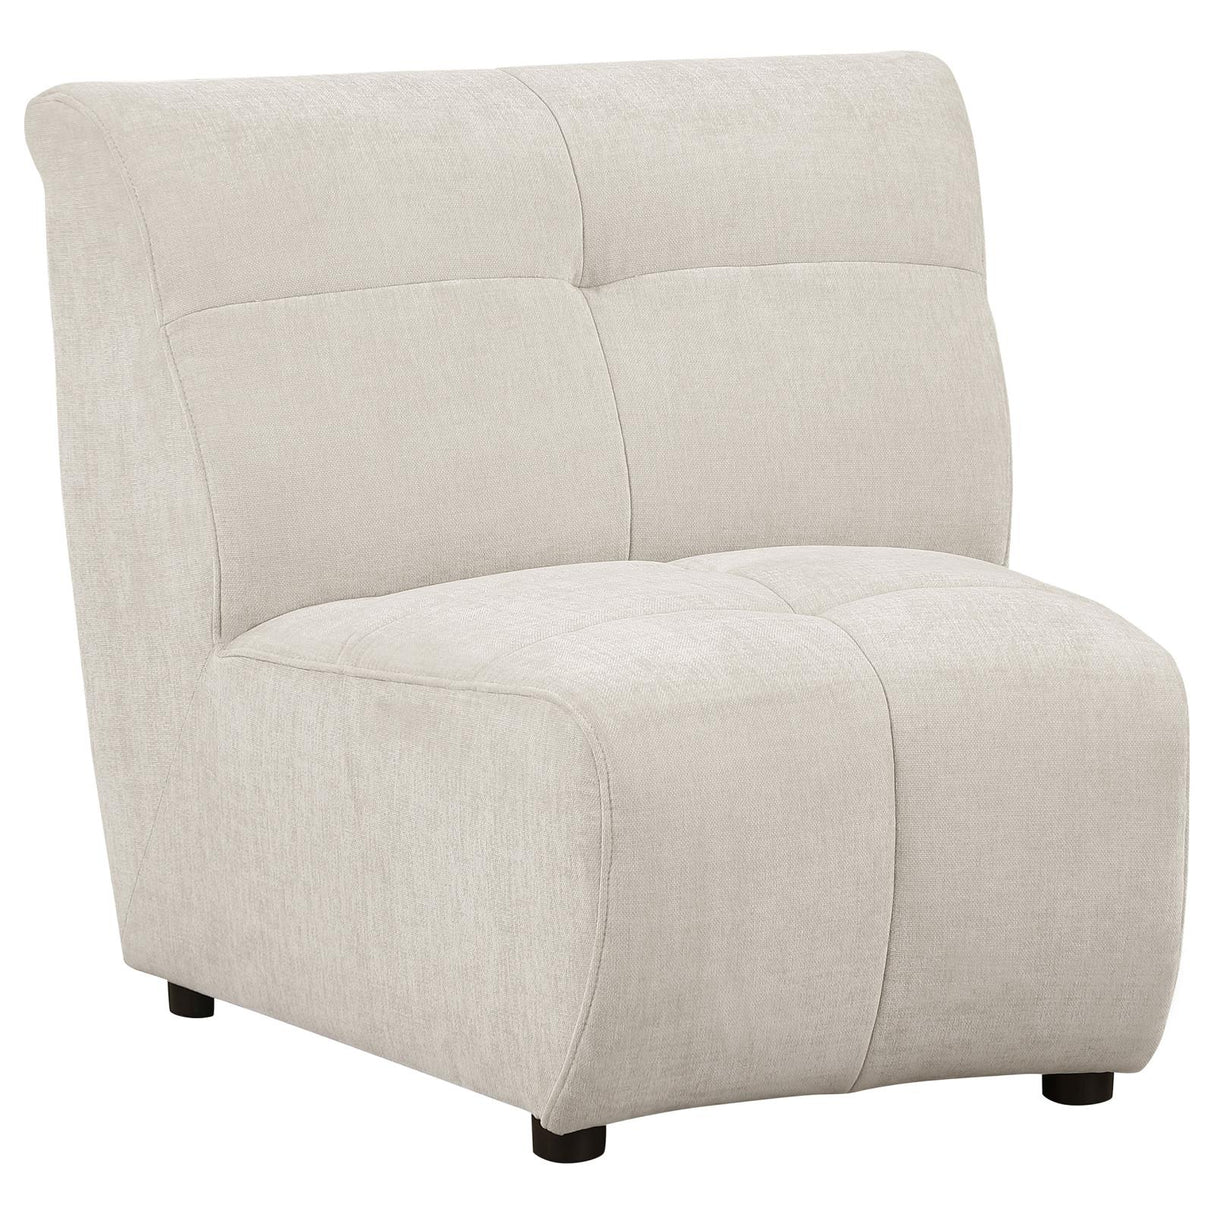 Charlotte 5-piece Upholstered Curved Modular Sectional Sofa Ivory - 551300-S5 - Luna Furniture